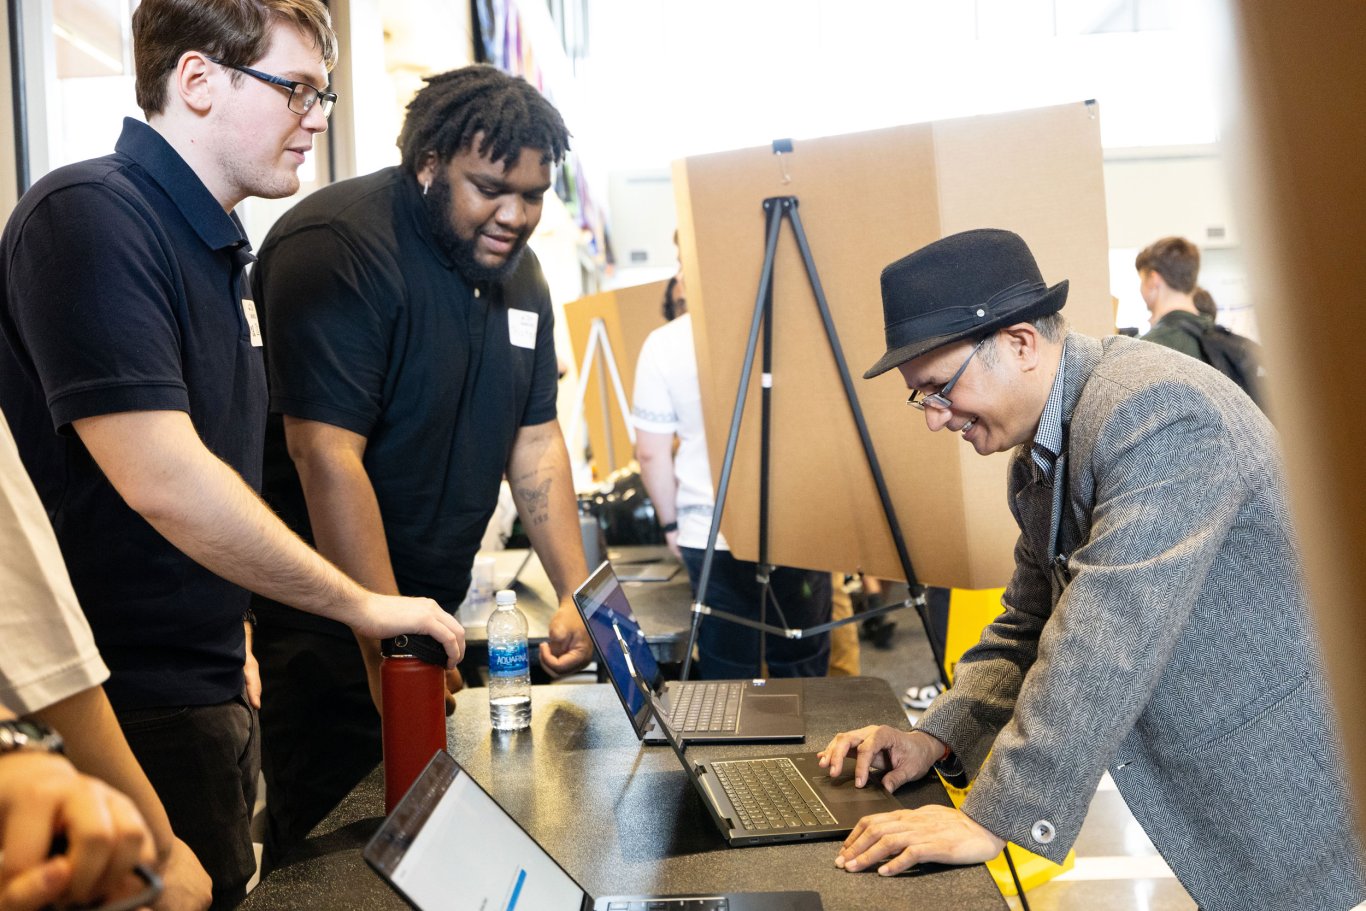 Two students demonstrate something on a laptop as a Showcase Day attendee looks on.